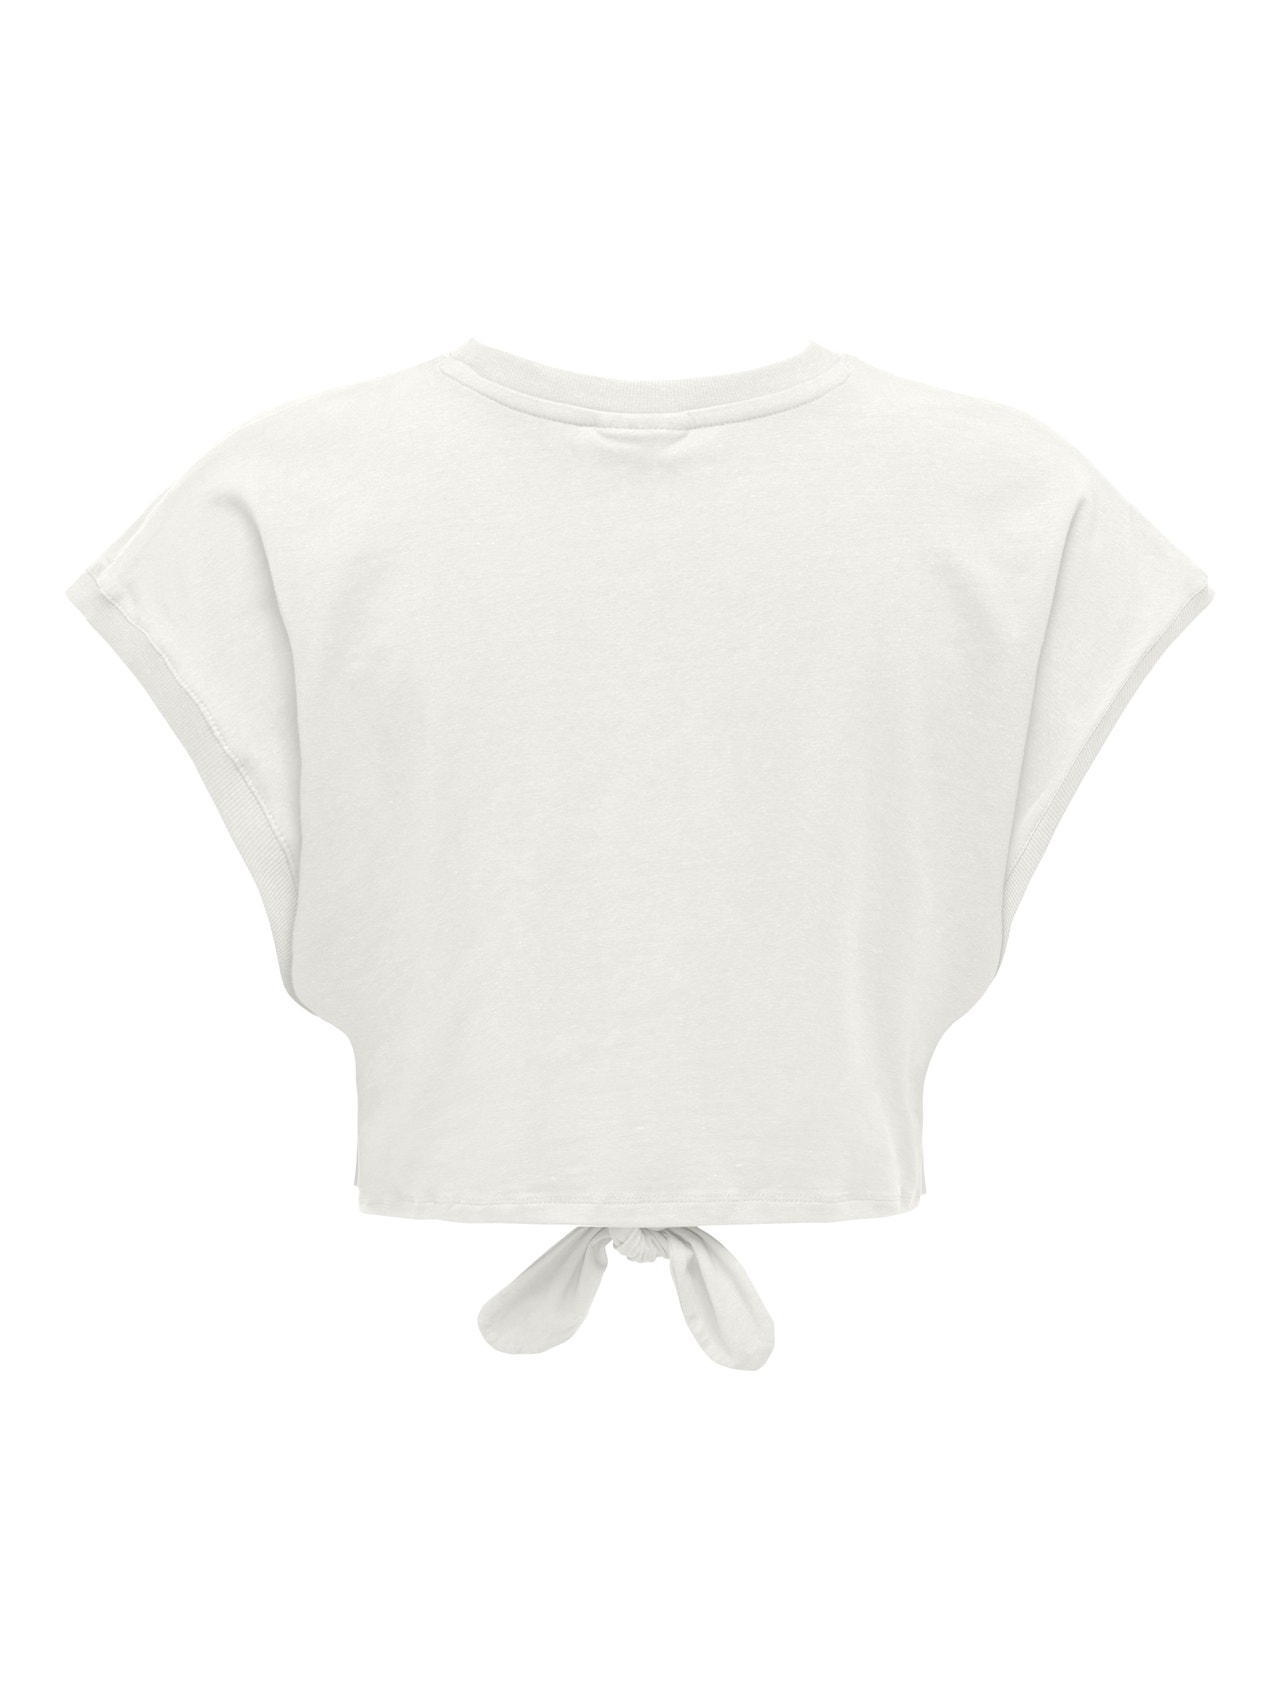 ONLY Cropped Top With Knot Detail -Cloud Dancer - 15296226